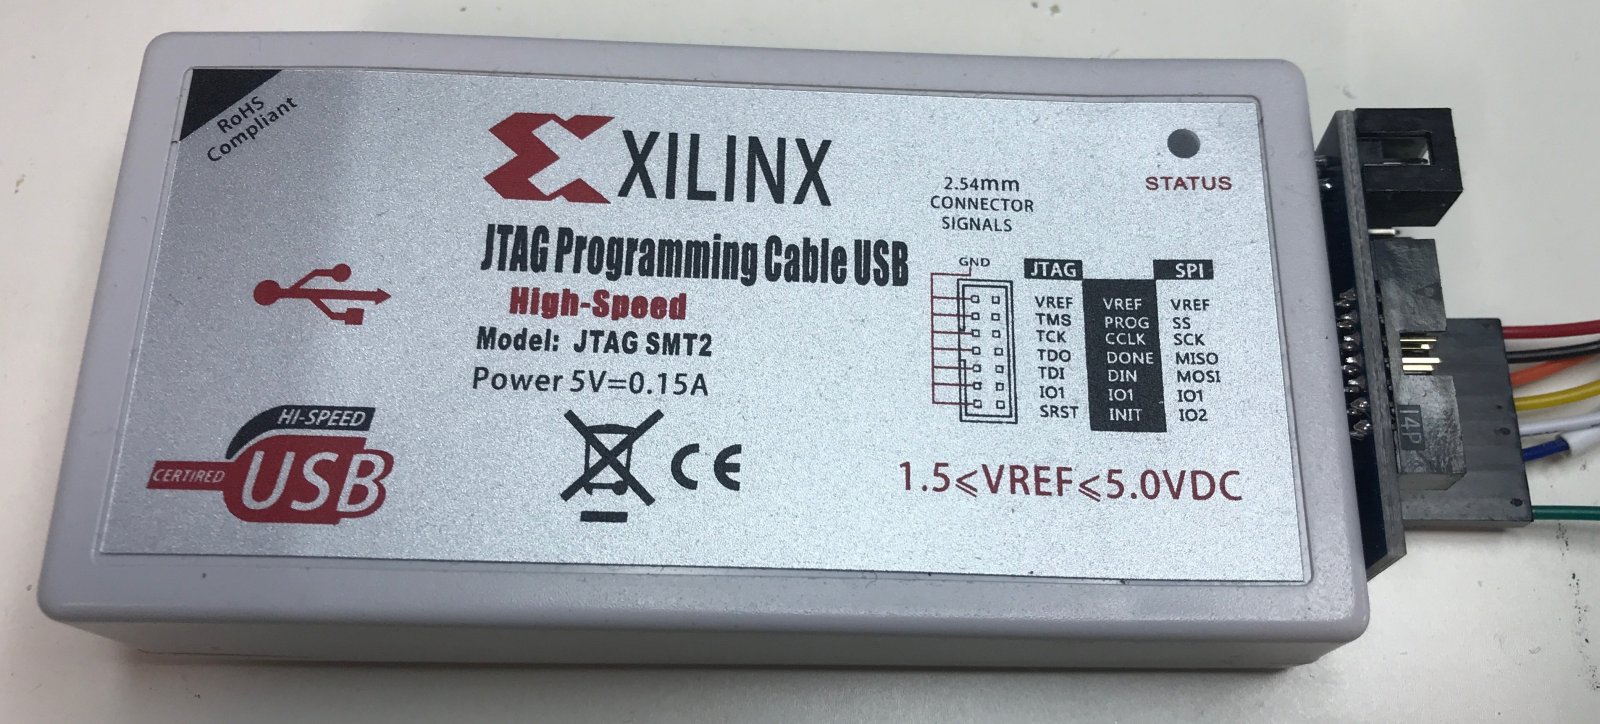 Xilinx Programming Cable